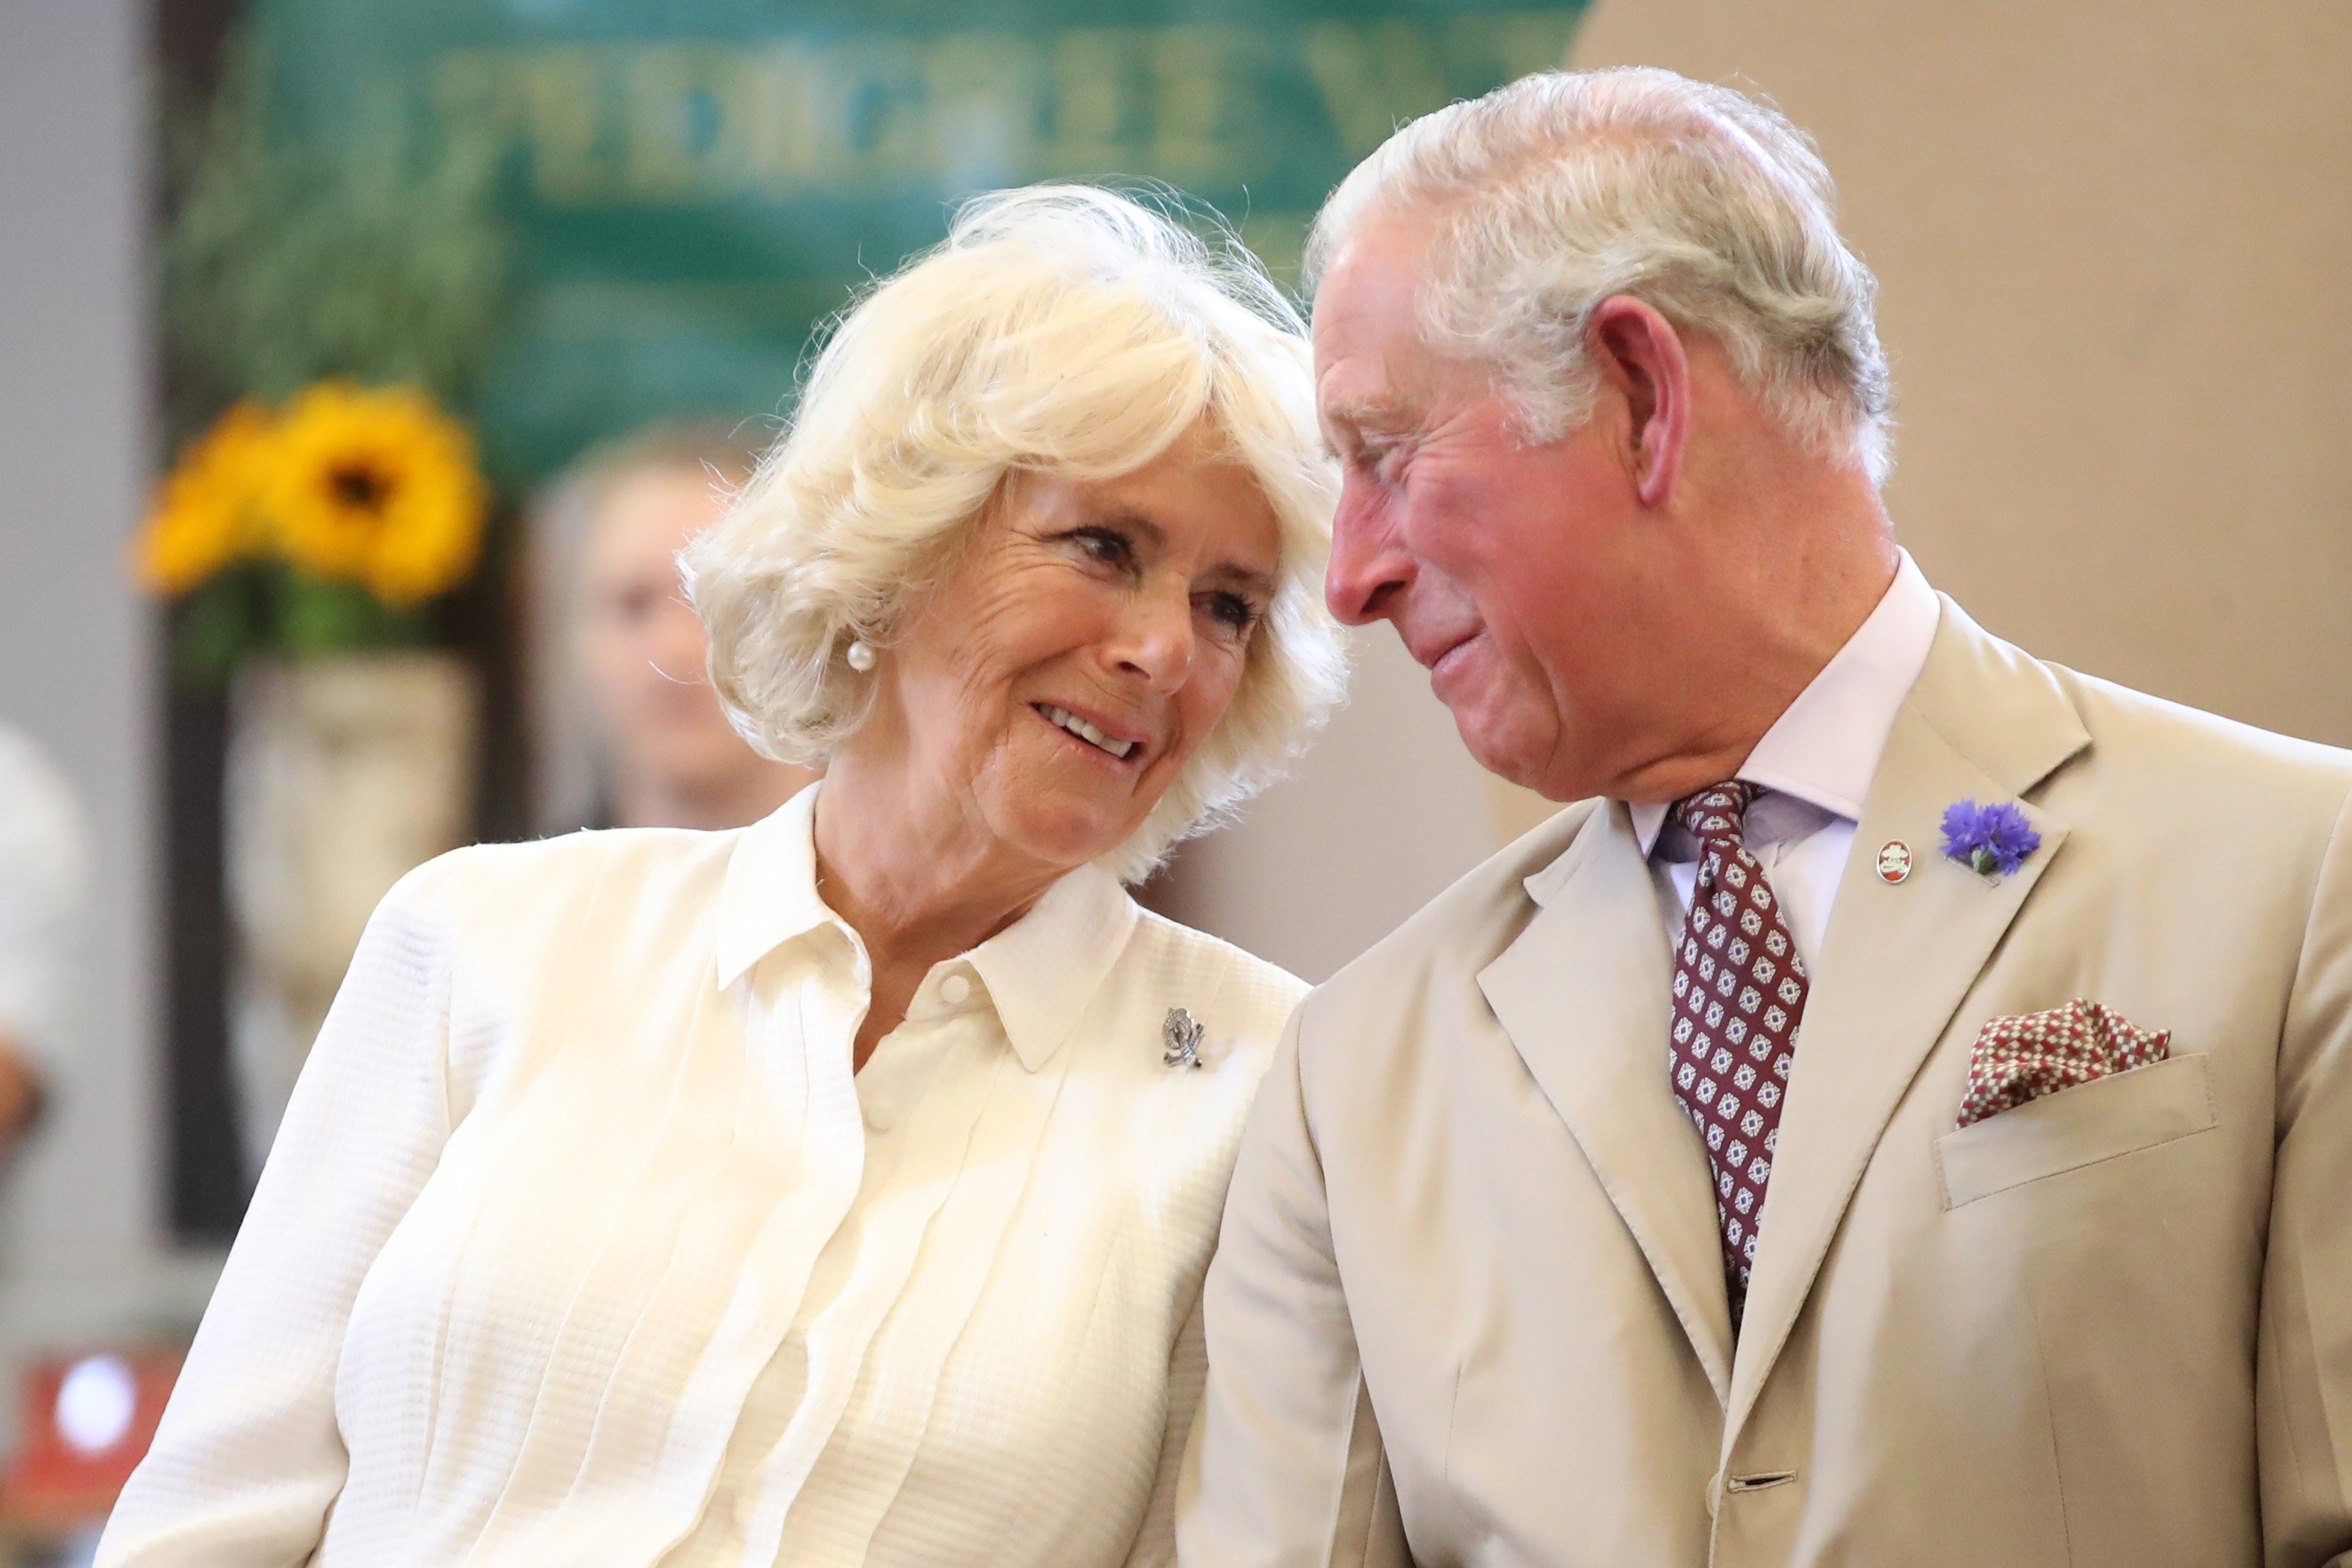 Camilla Parker Bowles (now-Queen Camilla) and King Charles III look at each other as they reopen the newly-renovated Edwardian community hall in Wales